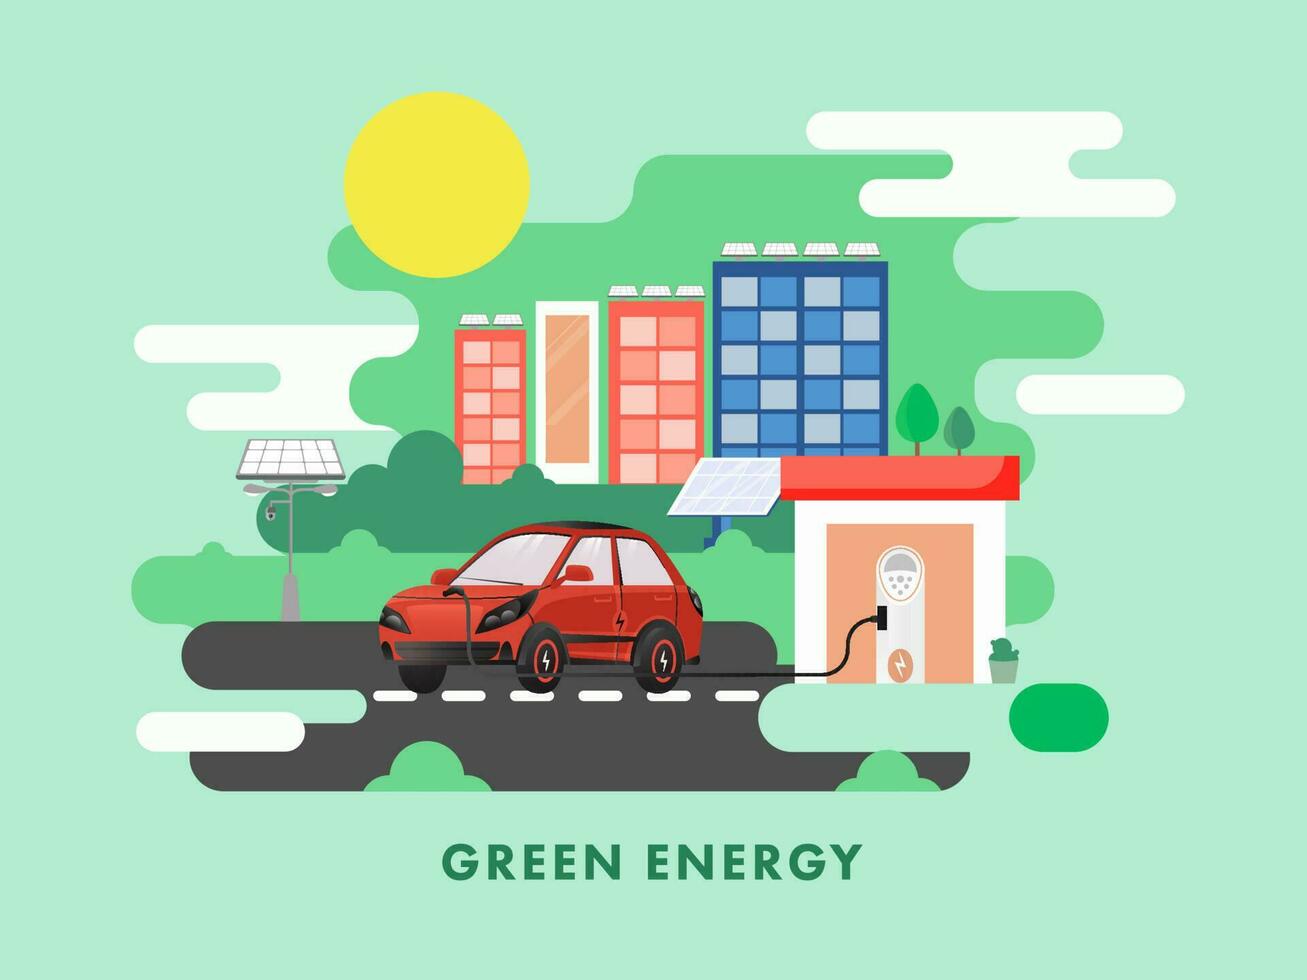 Vector Illustration Of Electric Car Charging At Station With Solar Panels, Buildings And Sun On Green Background For Renewable Energy Or E-Mobility.